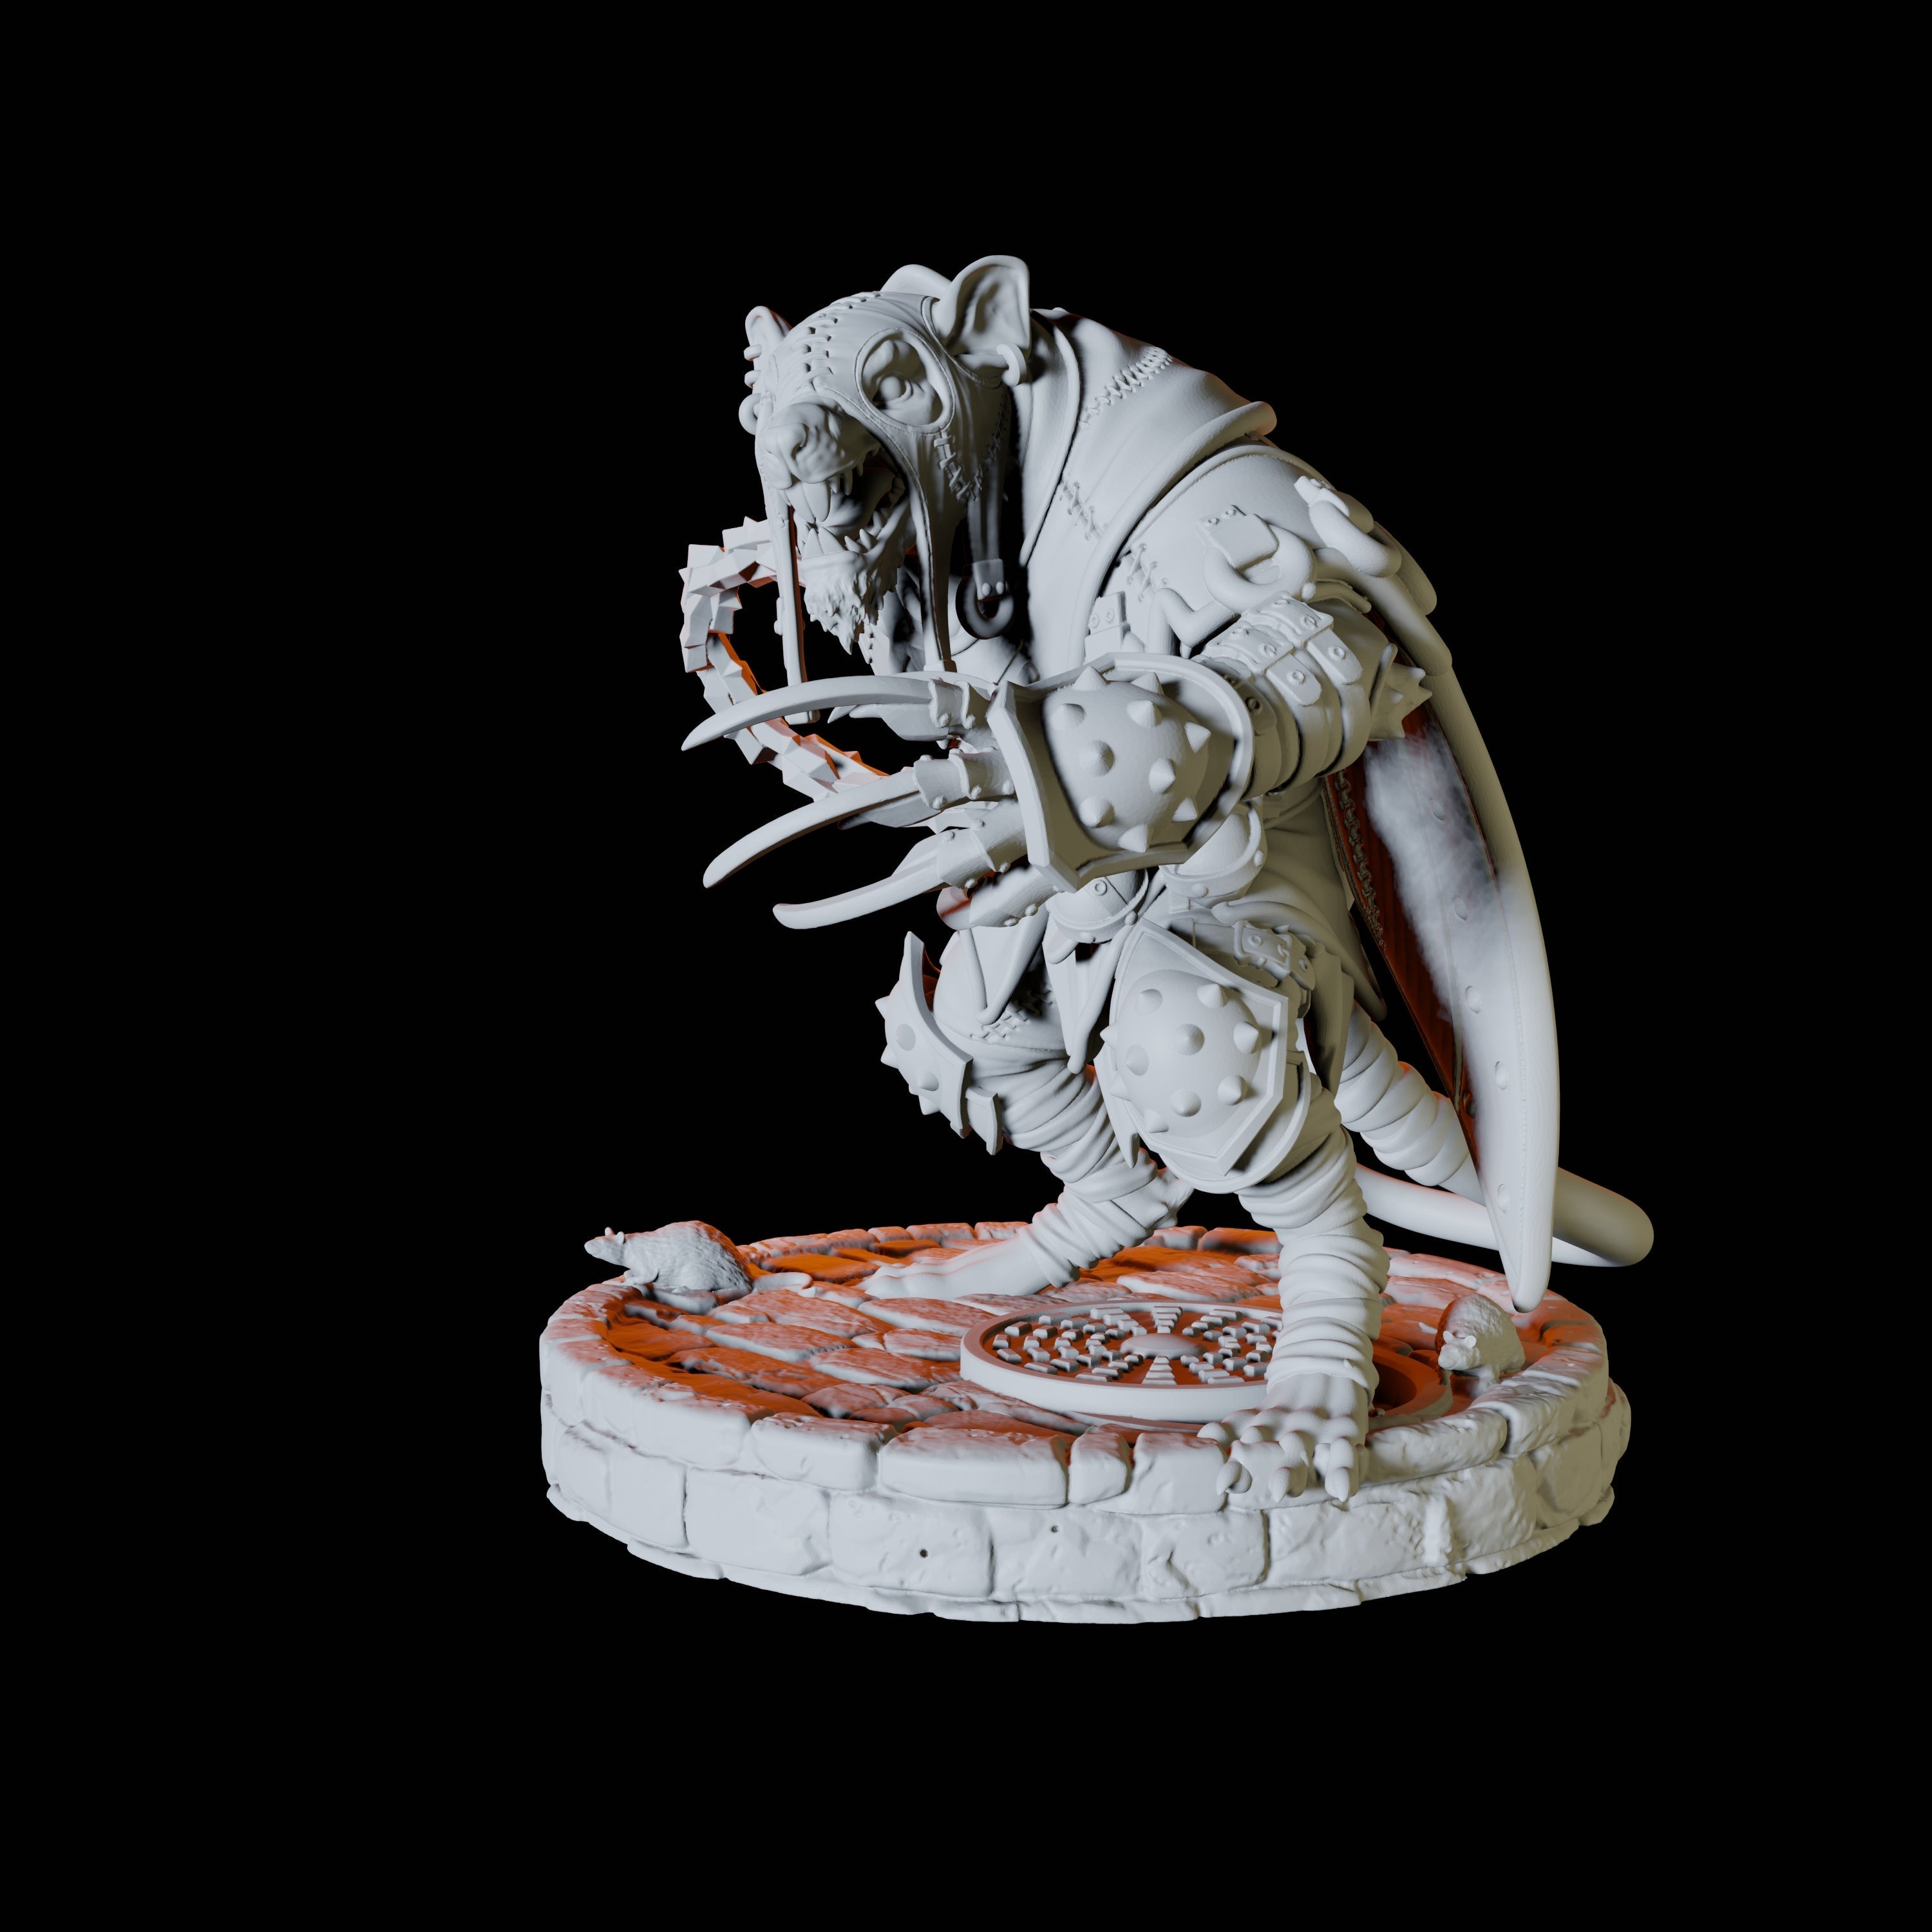 Ratfolk Assassin B Miniature for Dungeons and Dragons, Pathfinder or other TTRPGs